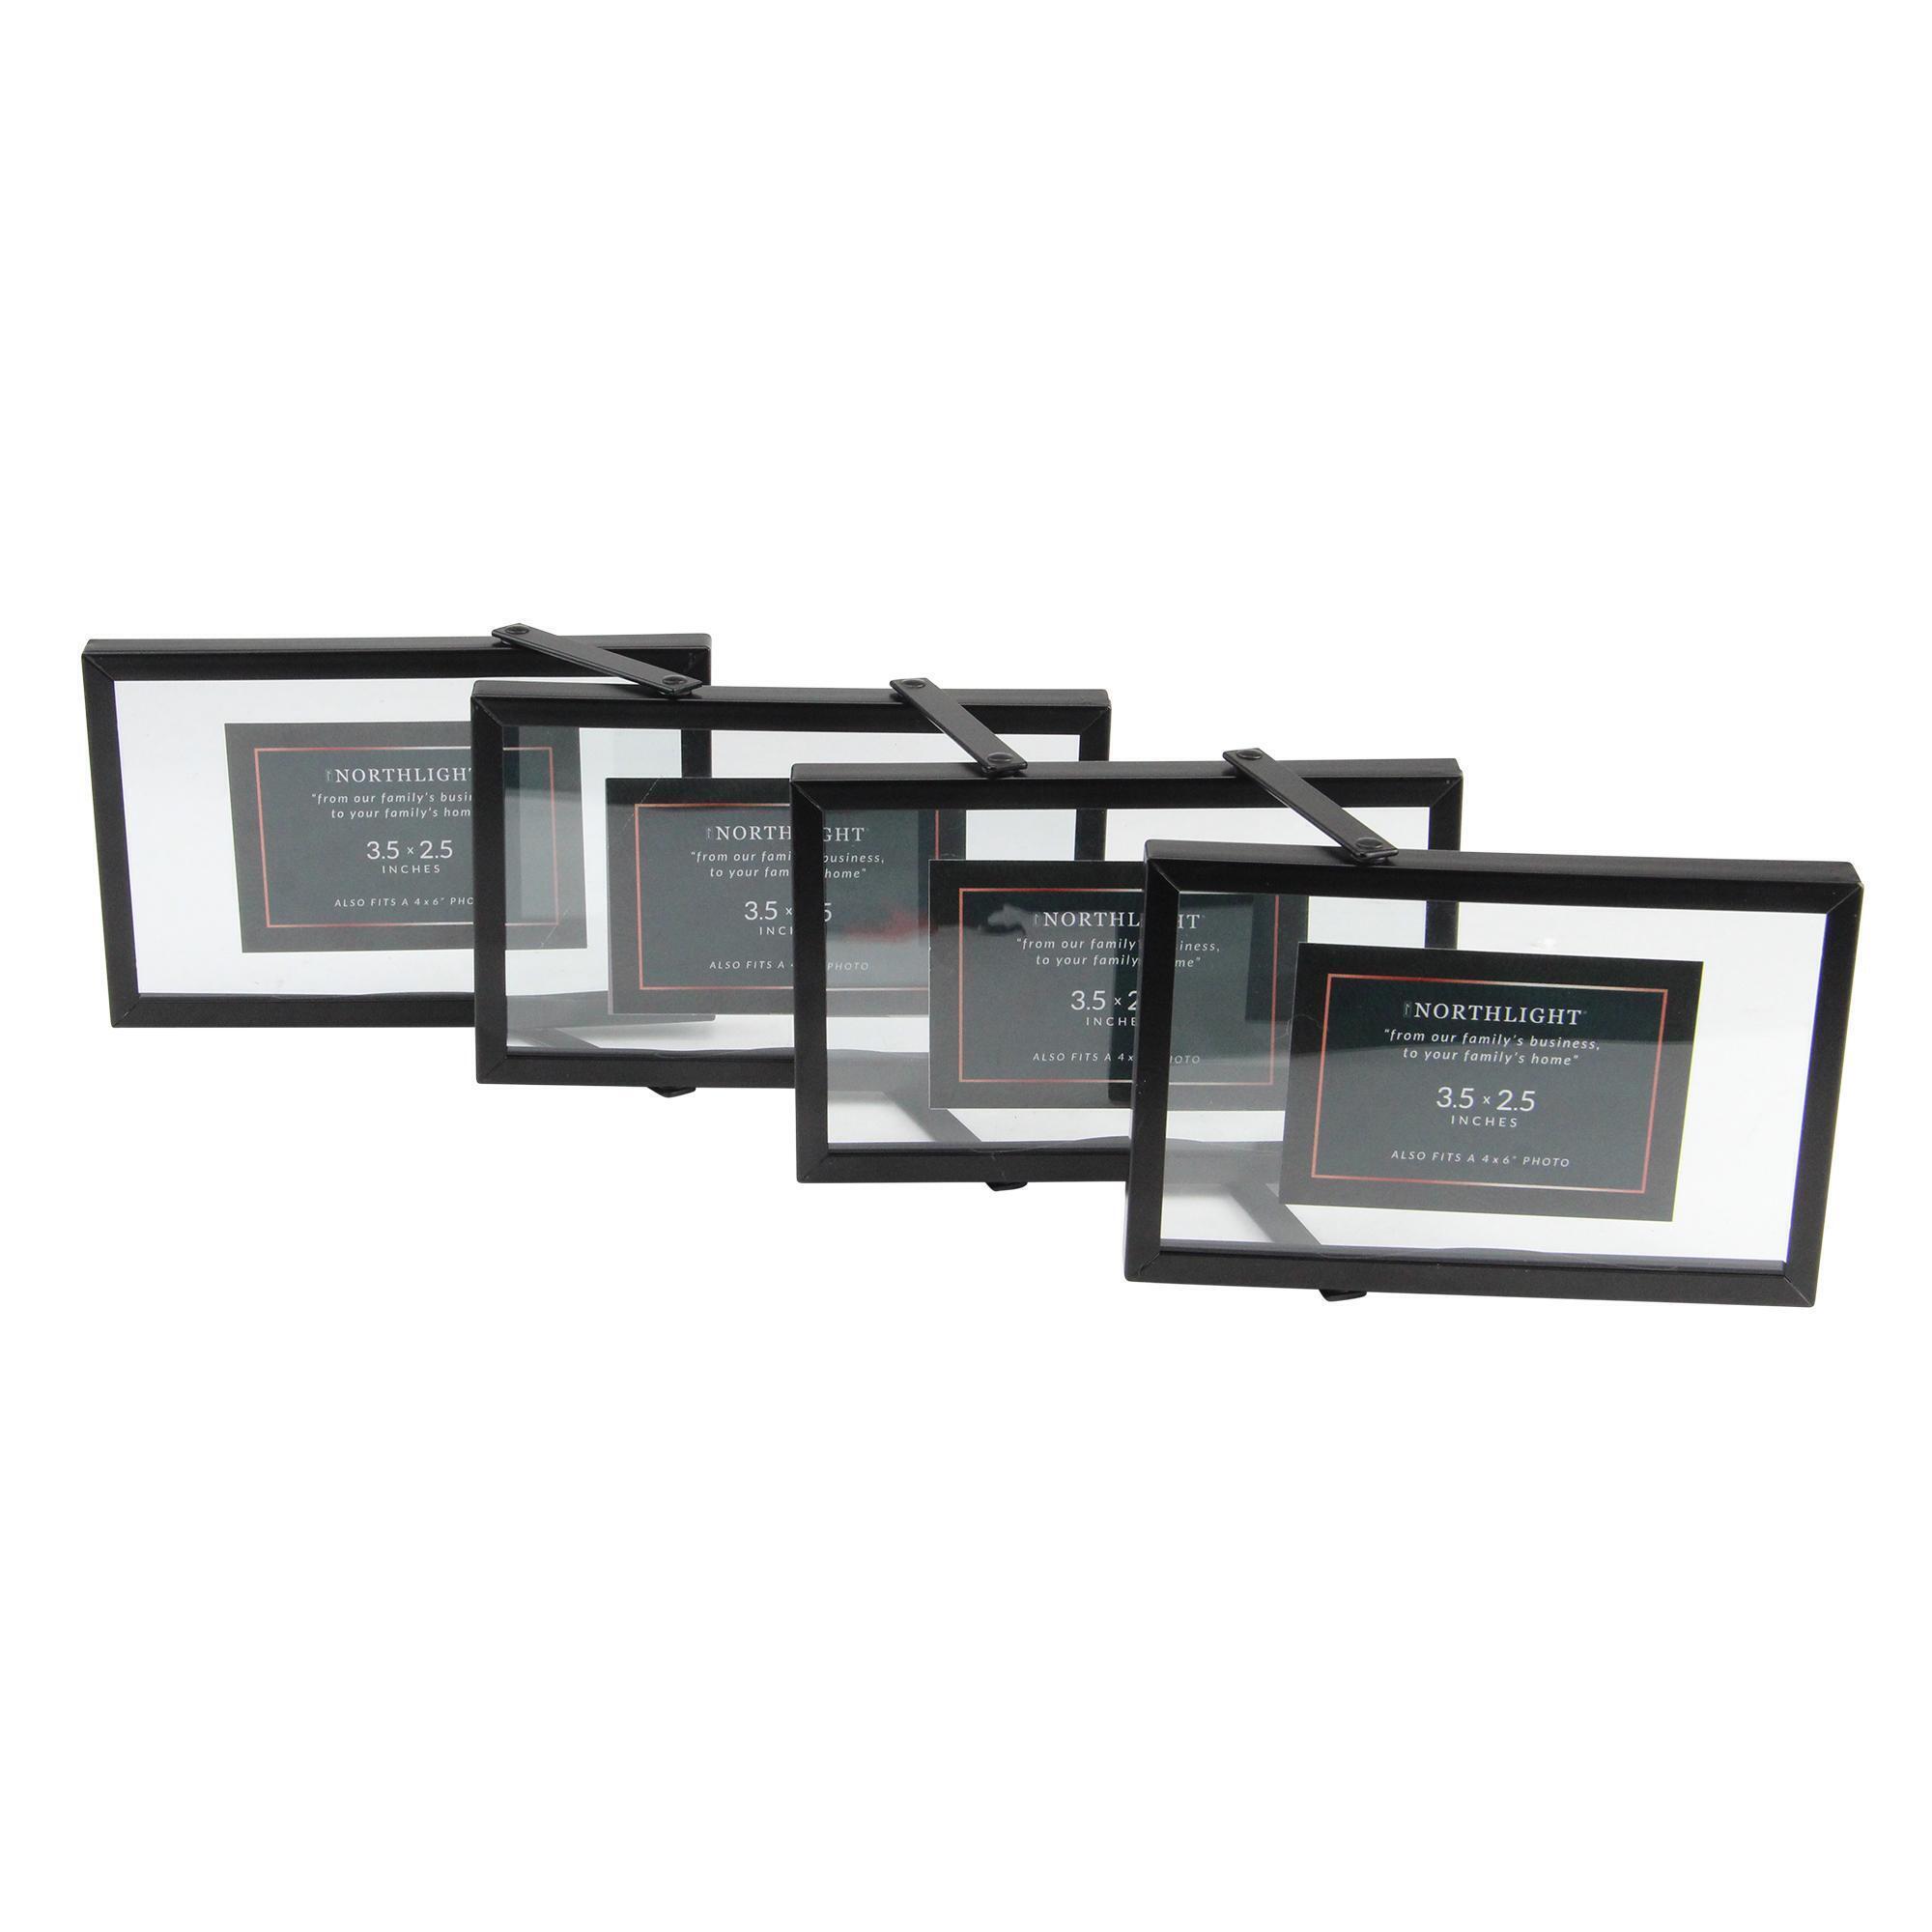 20" Contemporary Collapsible Rectangular 4" x 6" Photo Picture Frame - Black alternate image